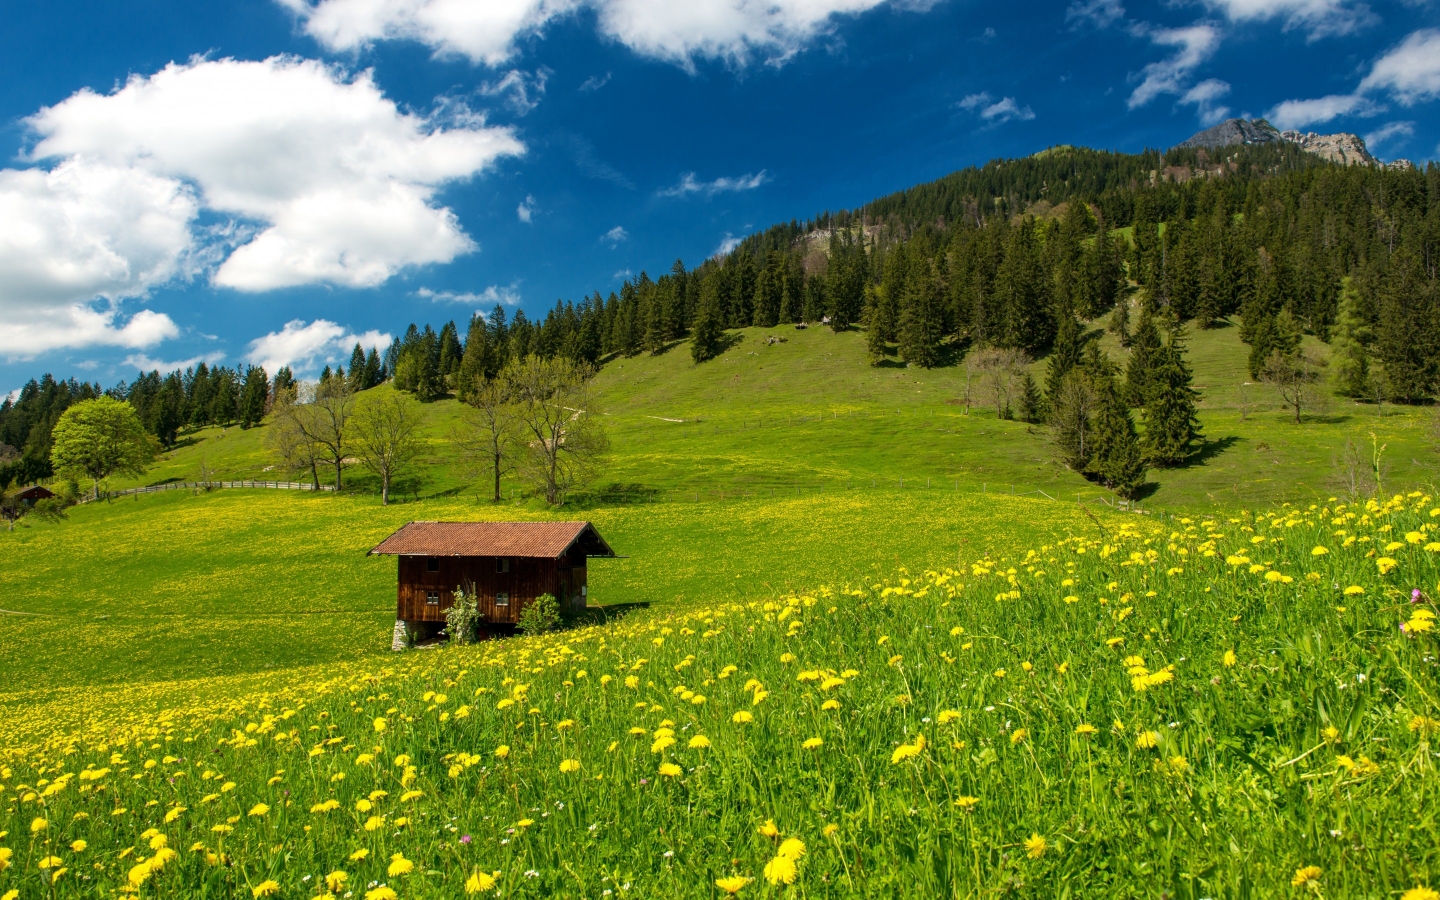 Pasture in the Bavarian Alp for 1440 x 900 widescreen resolution